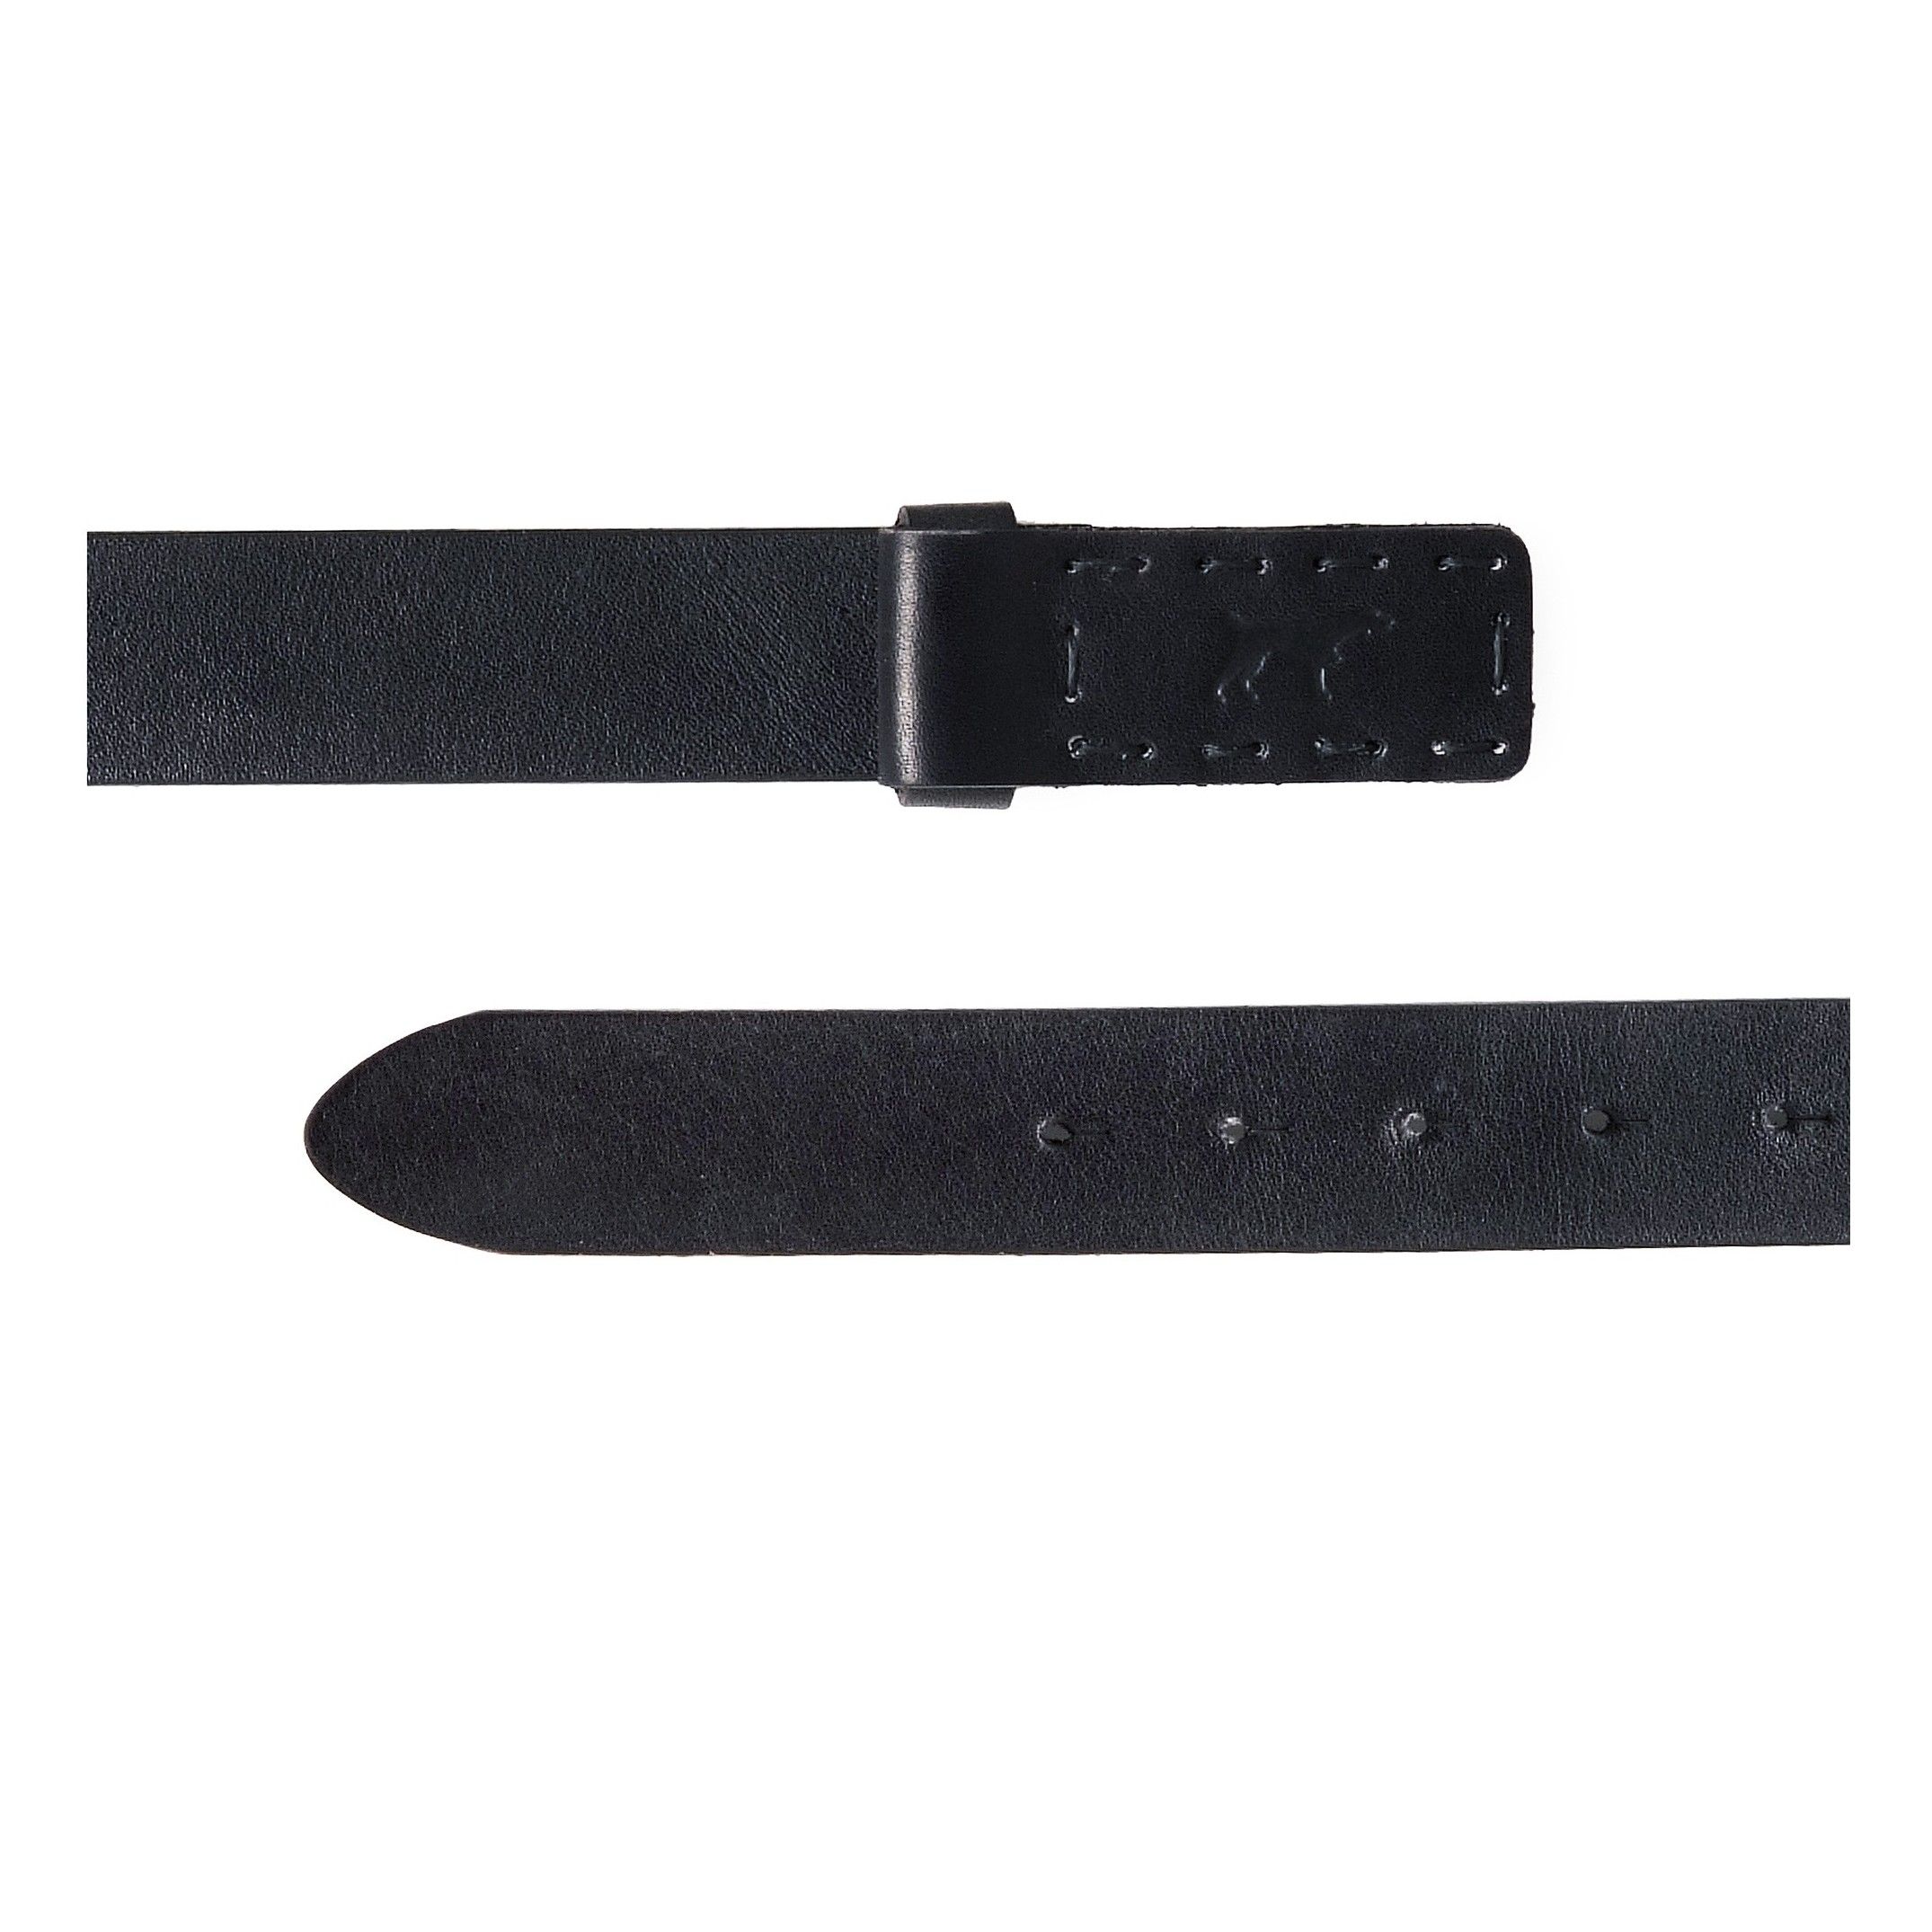 Adjustable belt. Classic leather. Removable metal buckle to adapt the belt. Width of 3,5 cm. Large of 100 cm & 115 cm. Black color. Classic style.